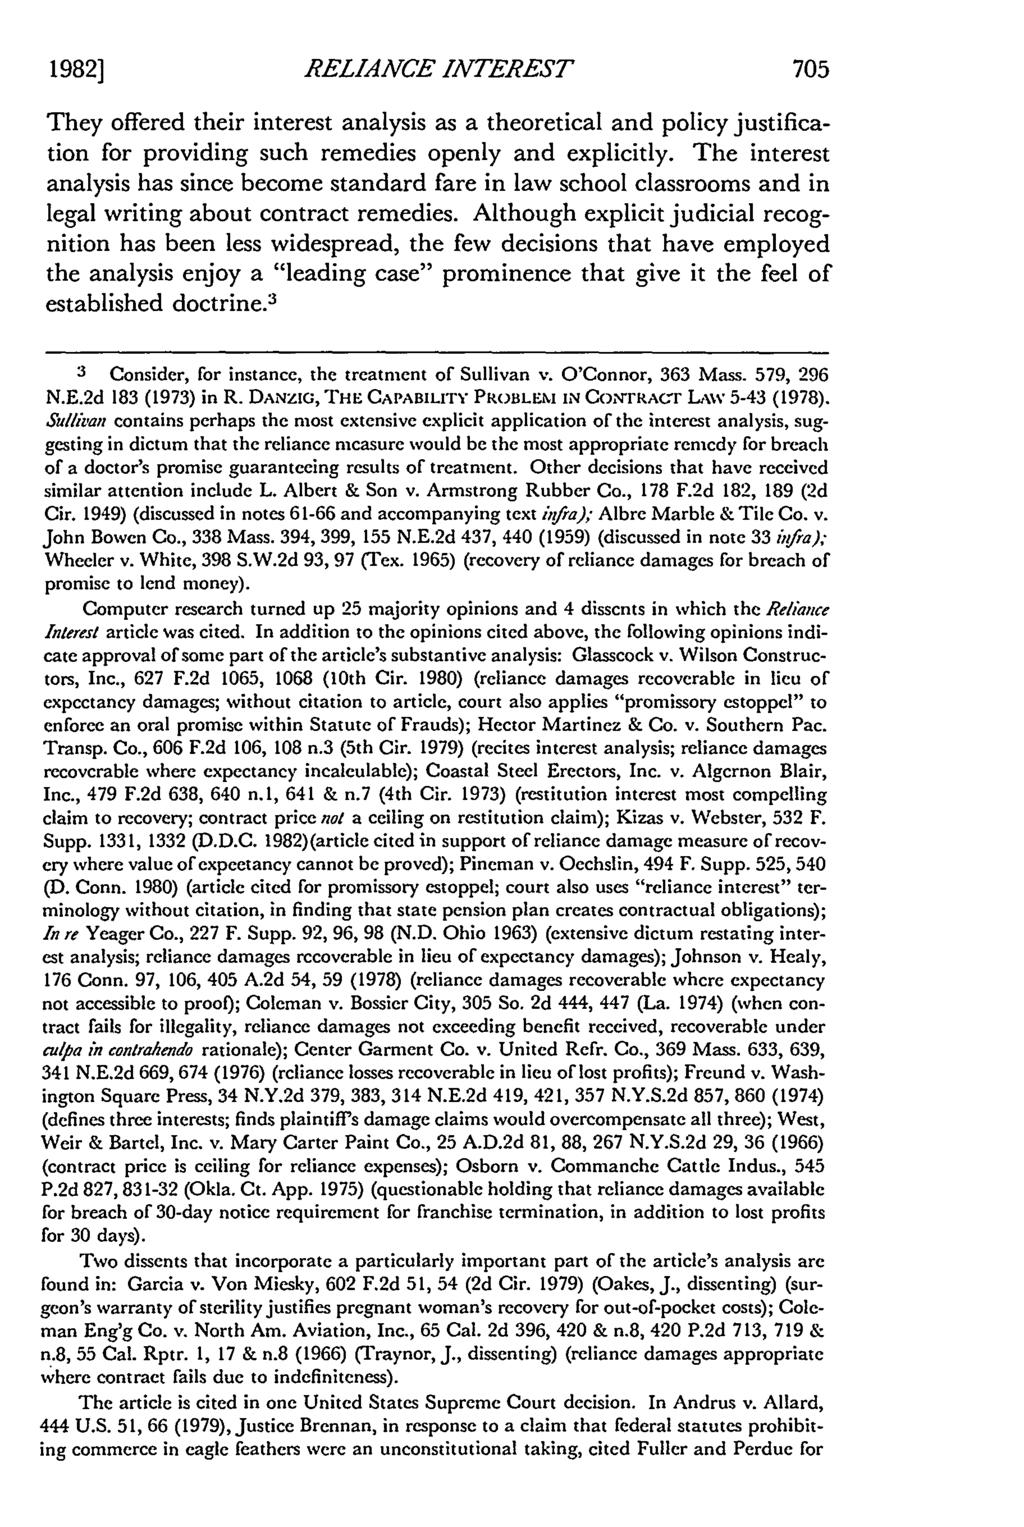 1982] RELIANCE INTEREST They offered their interest analysis as a theoretical and policy justification for providing such remedies openly and explicitly.